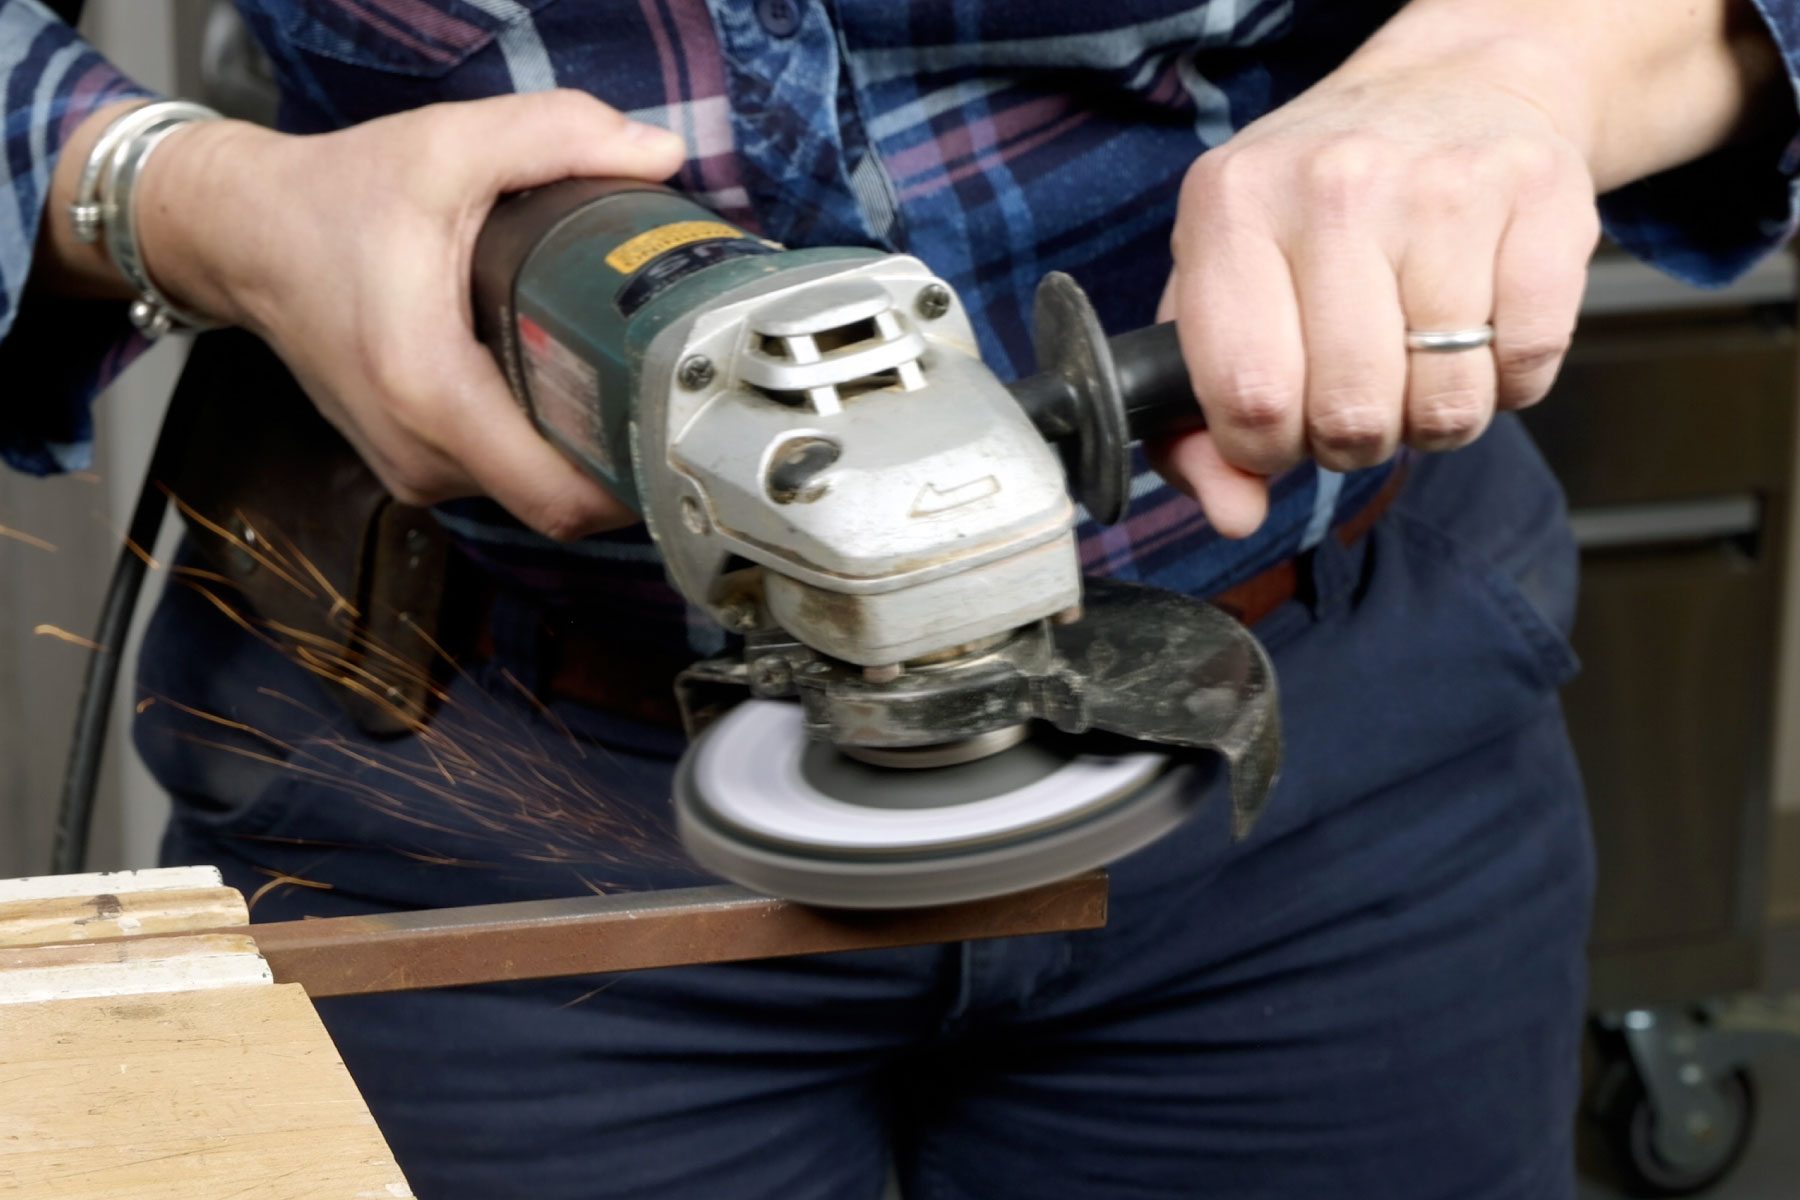 How to Use an Angle Grinder